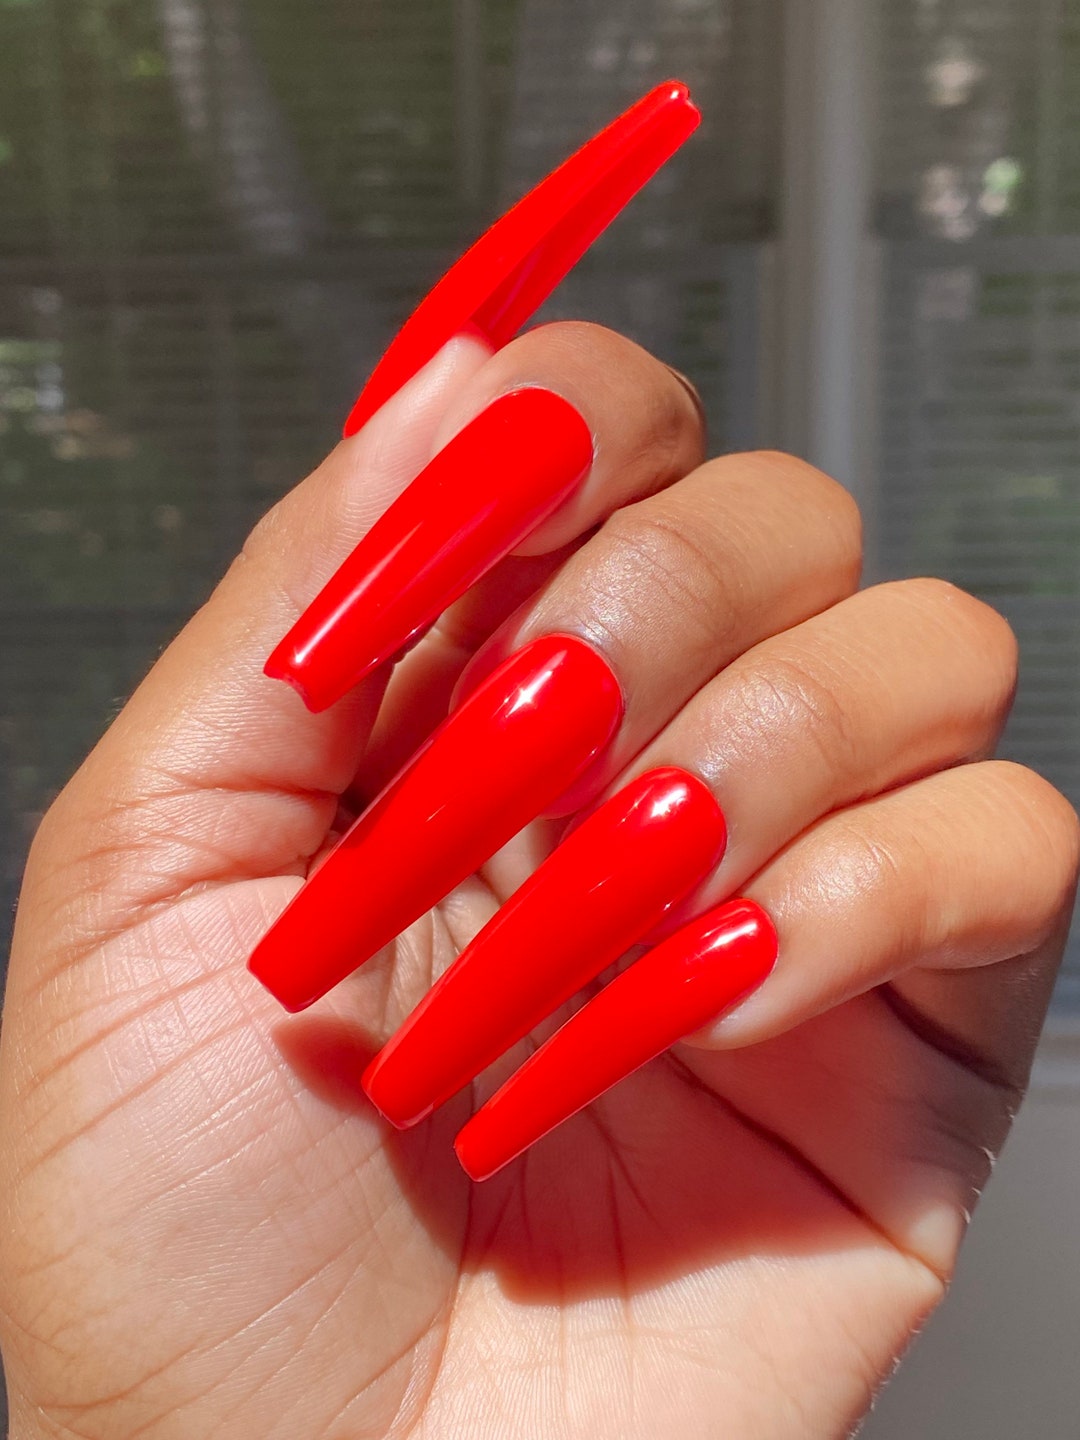 Candy Apple Bright Red Press-on Nails Press-on Nails 